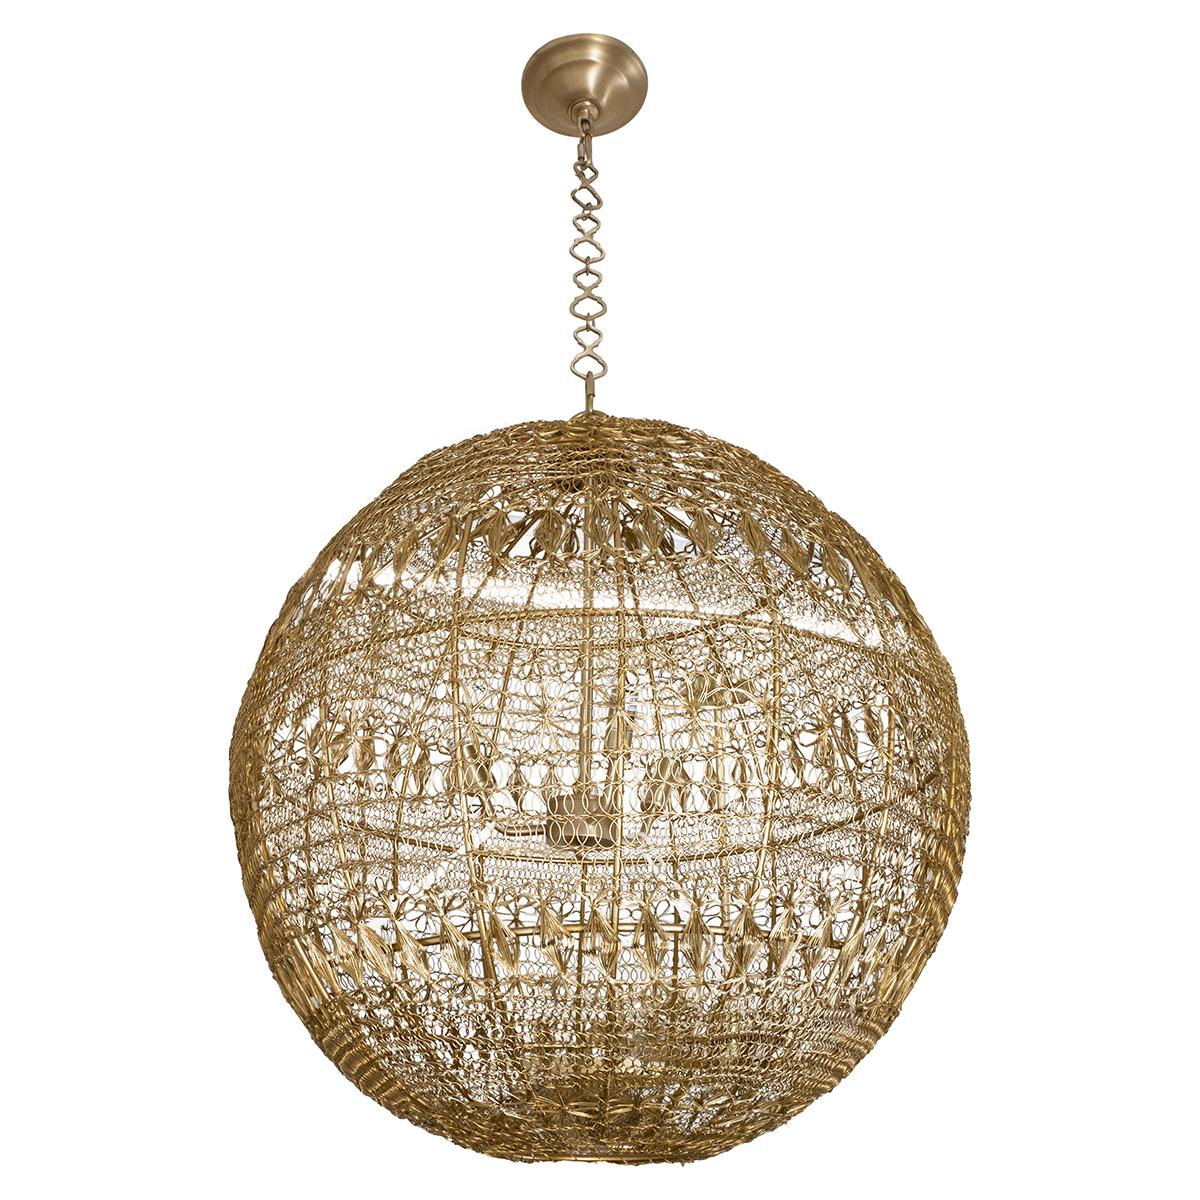 Monumental brass wire pendant with intricate wrought pattern including a flower motif.